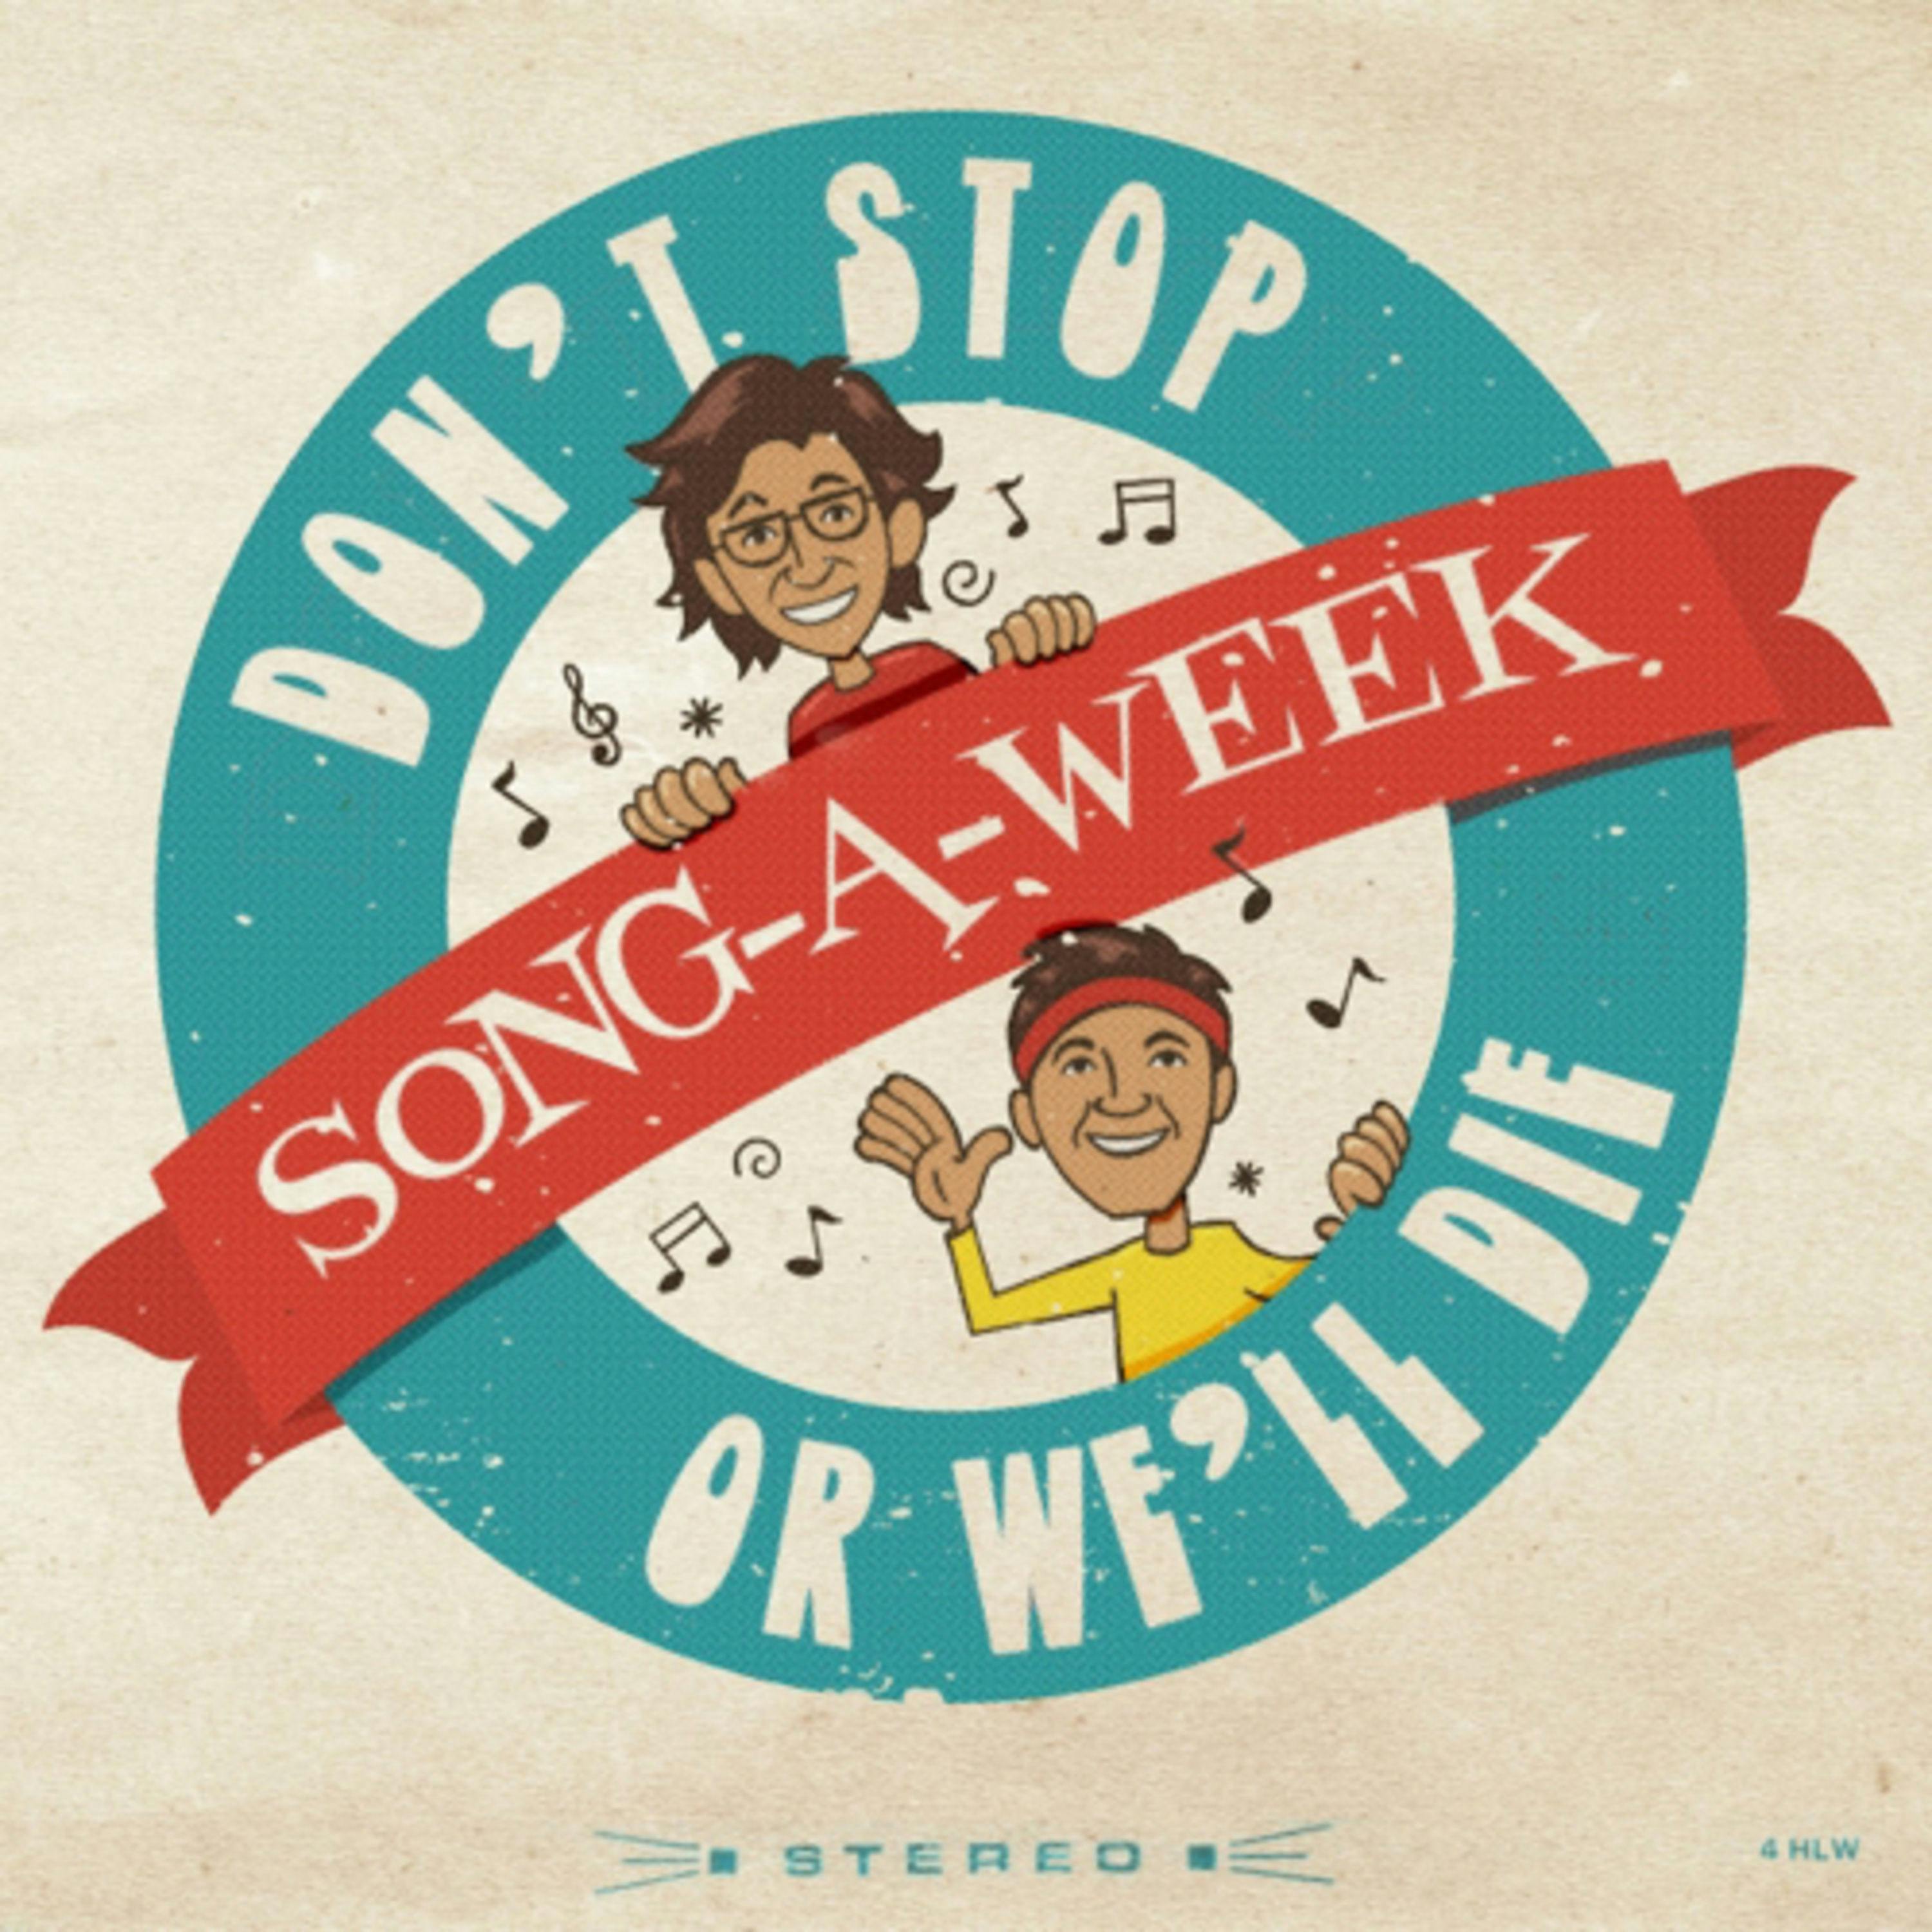 Song-A-Week